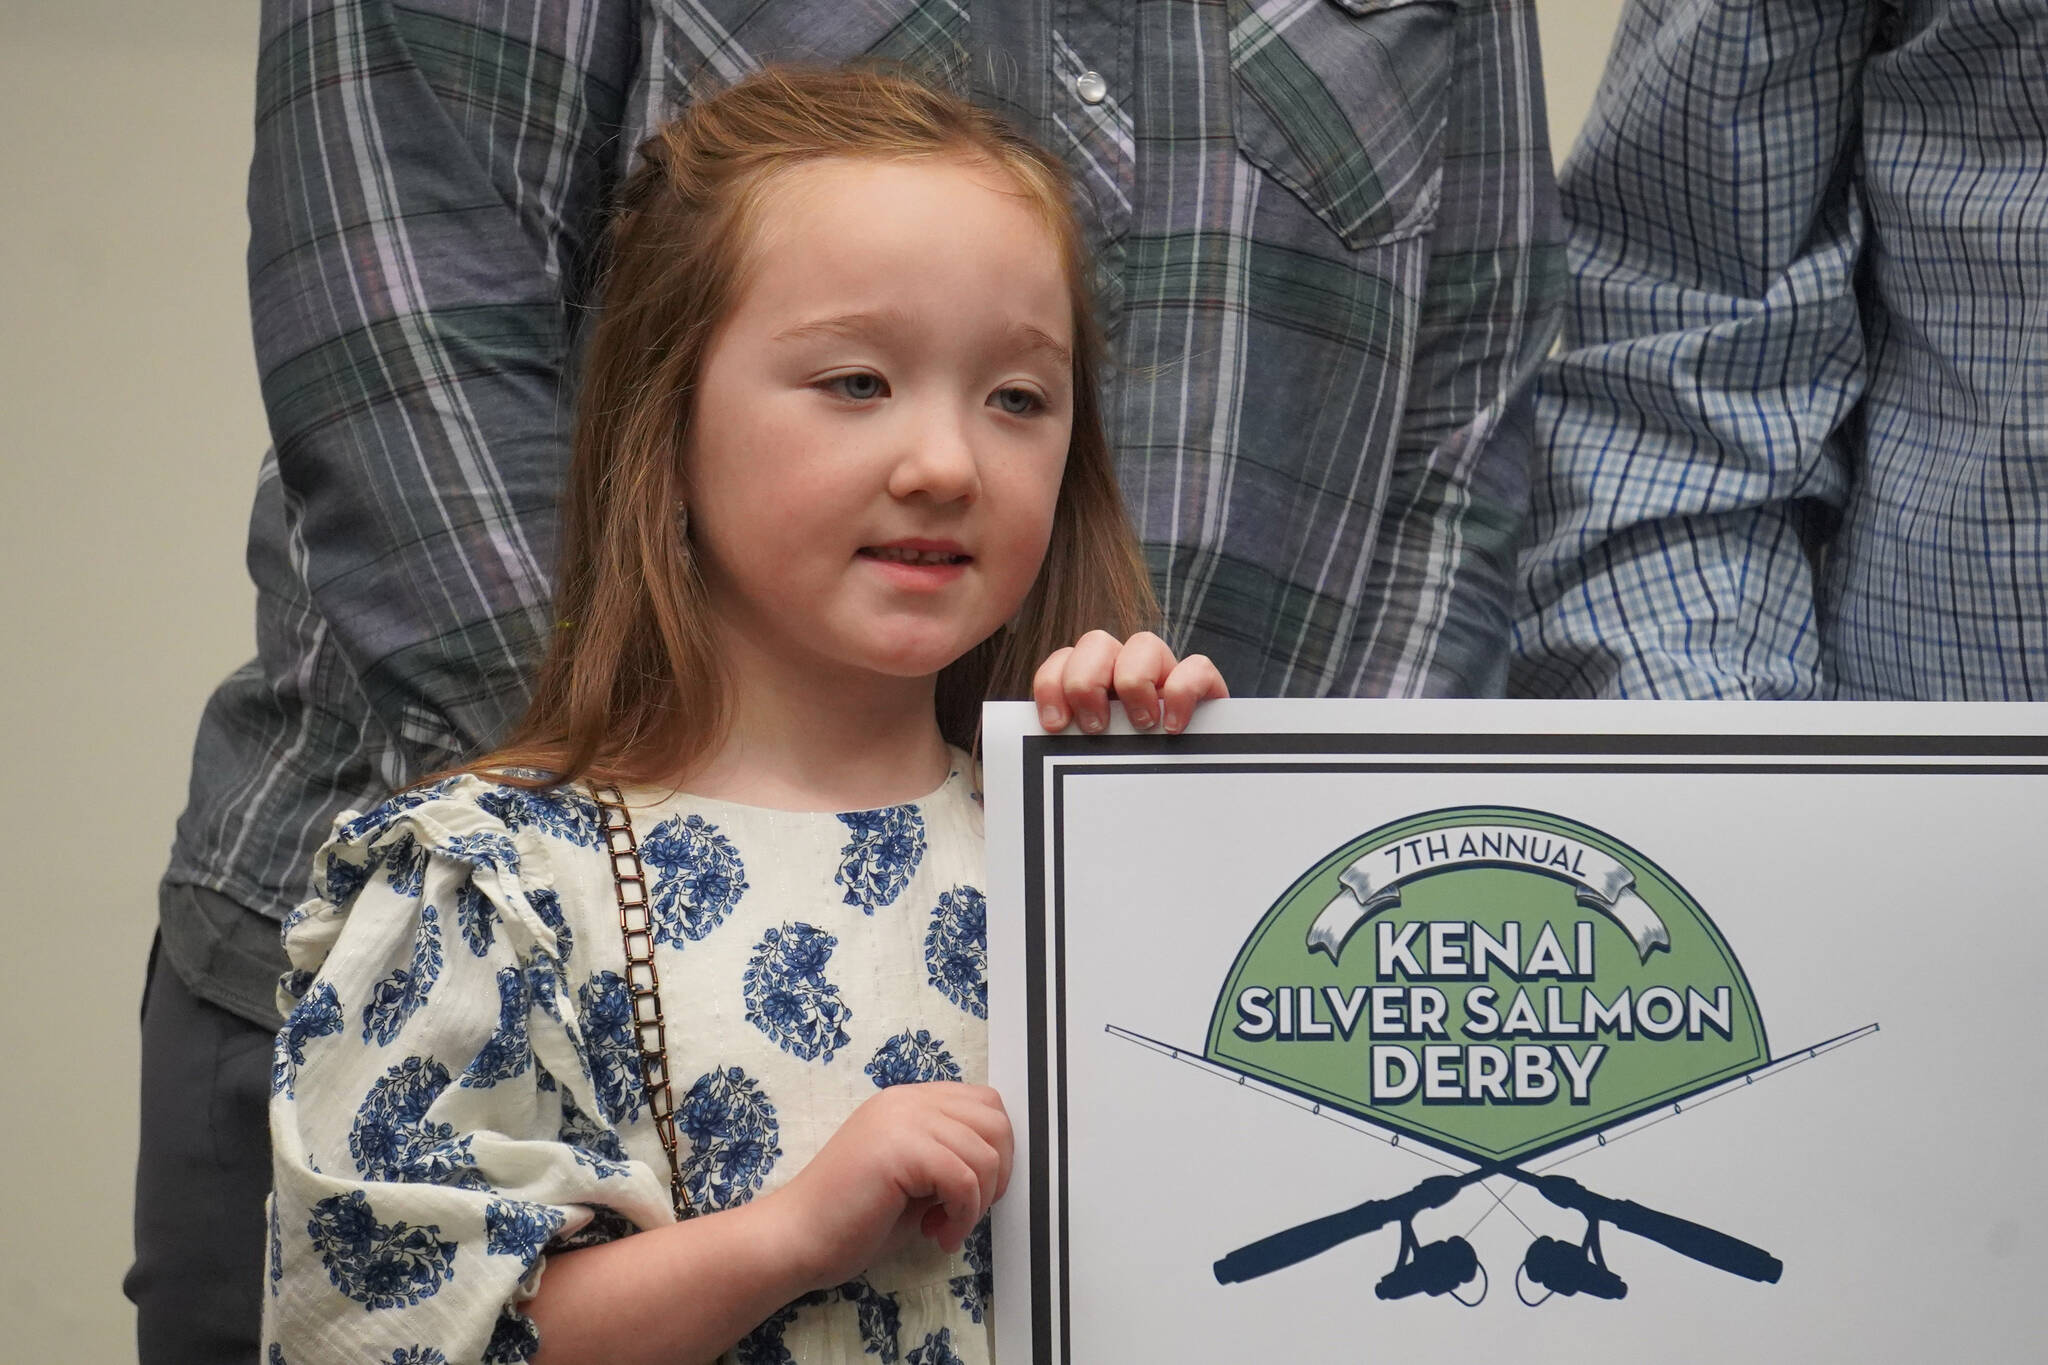 Abigal Craig, youth winner of the Seventh Annual Kenai Silver Salmon Derby, is presented a novelty check at the Kenai Chamber of Commerce and Visitor Center in Kenai, Alaska, on Wednesday, Sept. 20, 2023. (Jake Dye/Peninsula Clarion)